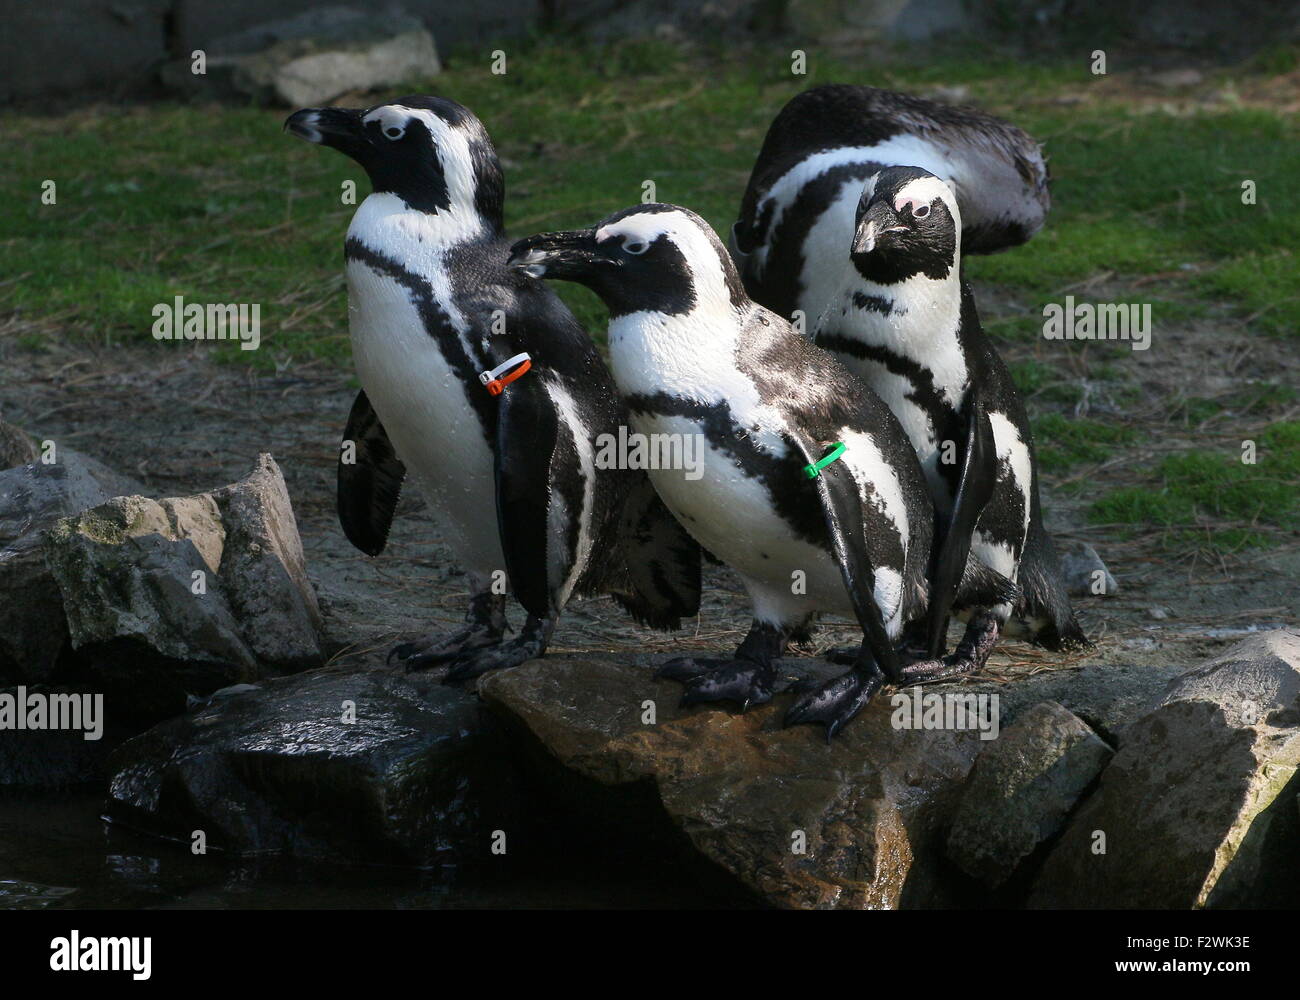 Three Black footed penguins (Spheniscus demersus) on the shore, a.k.a. African penguin or Jackass penguin Stock Photo